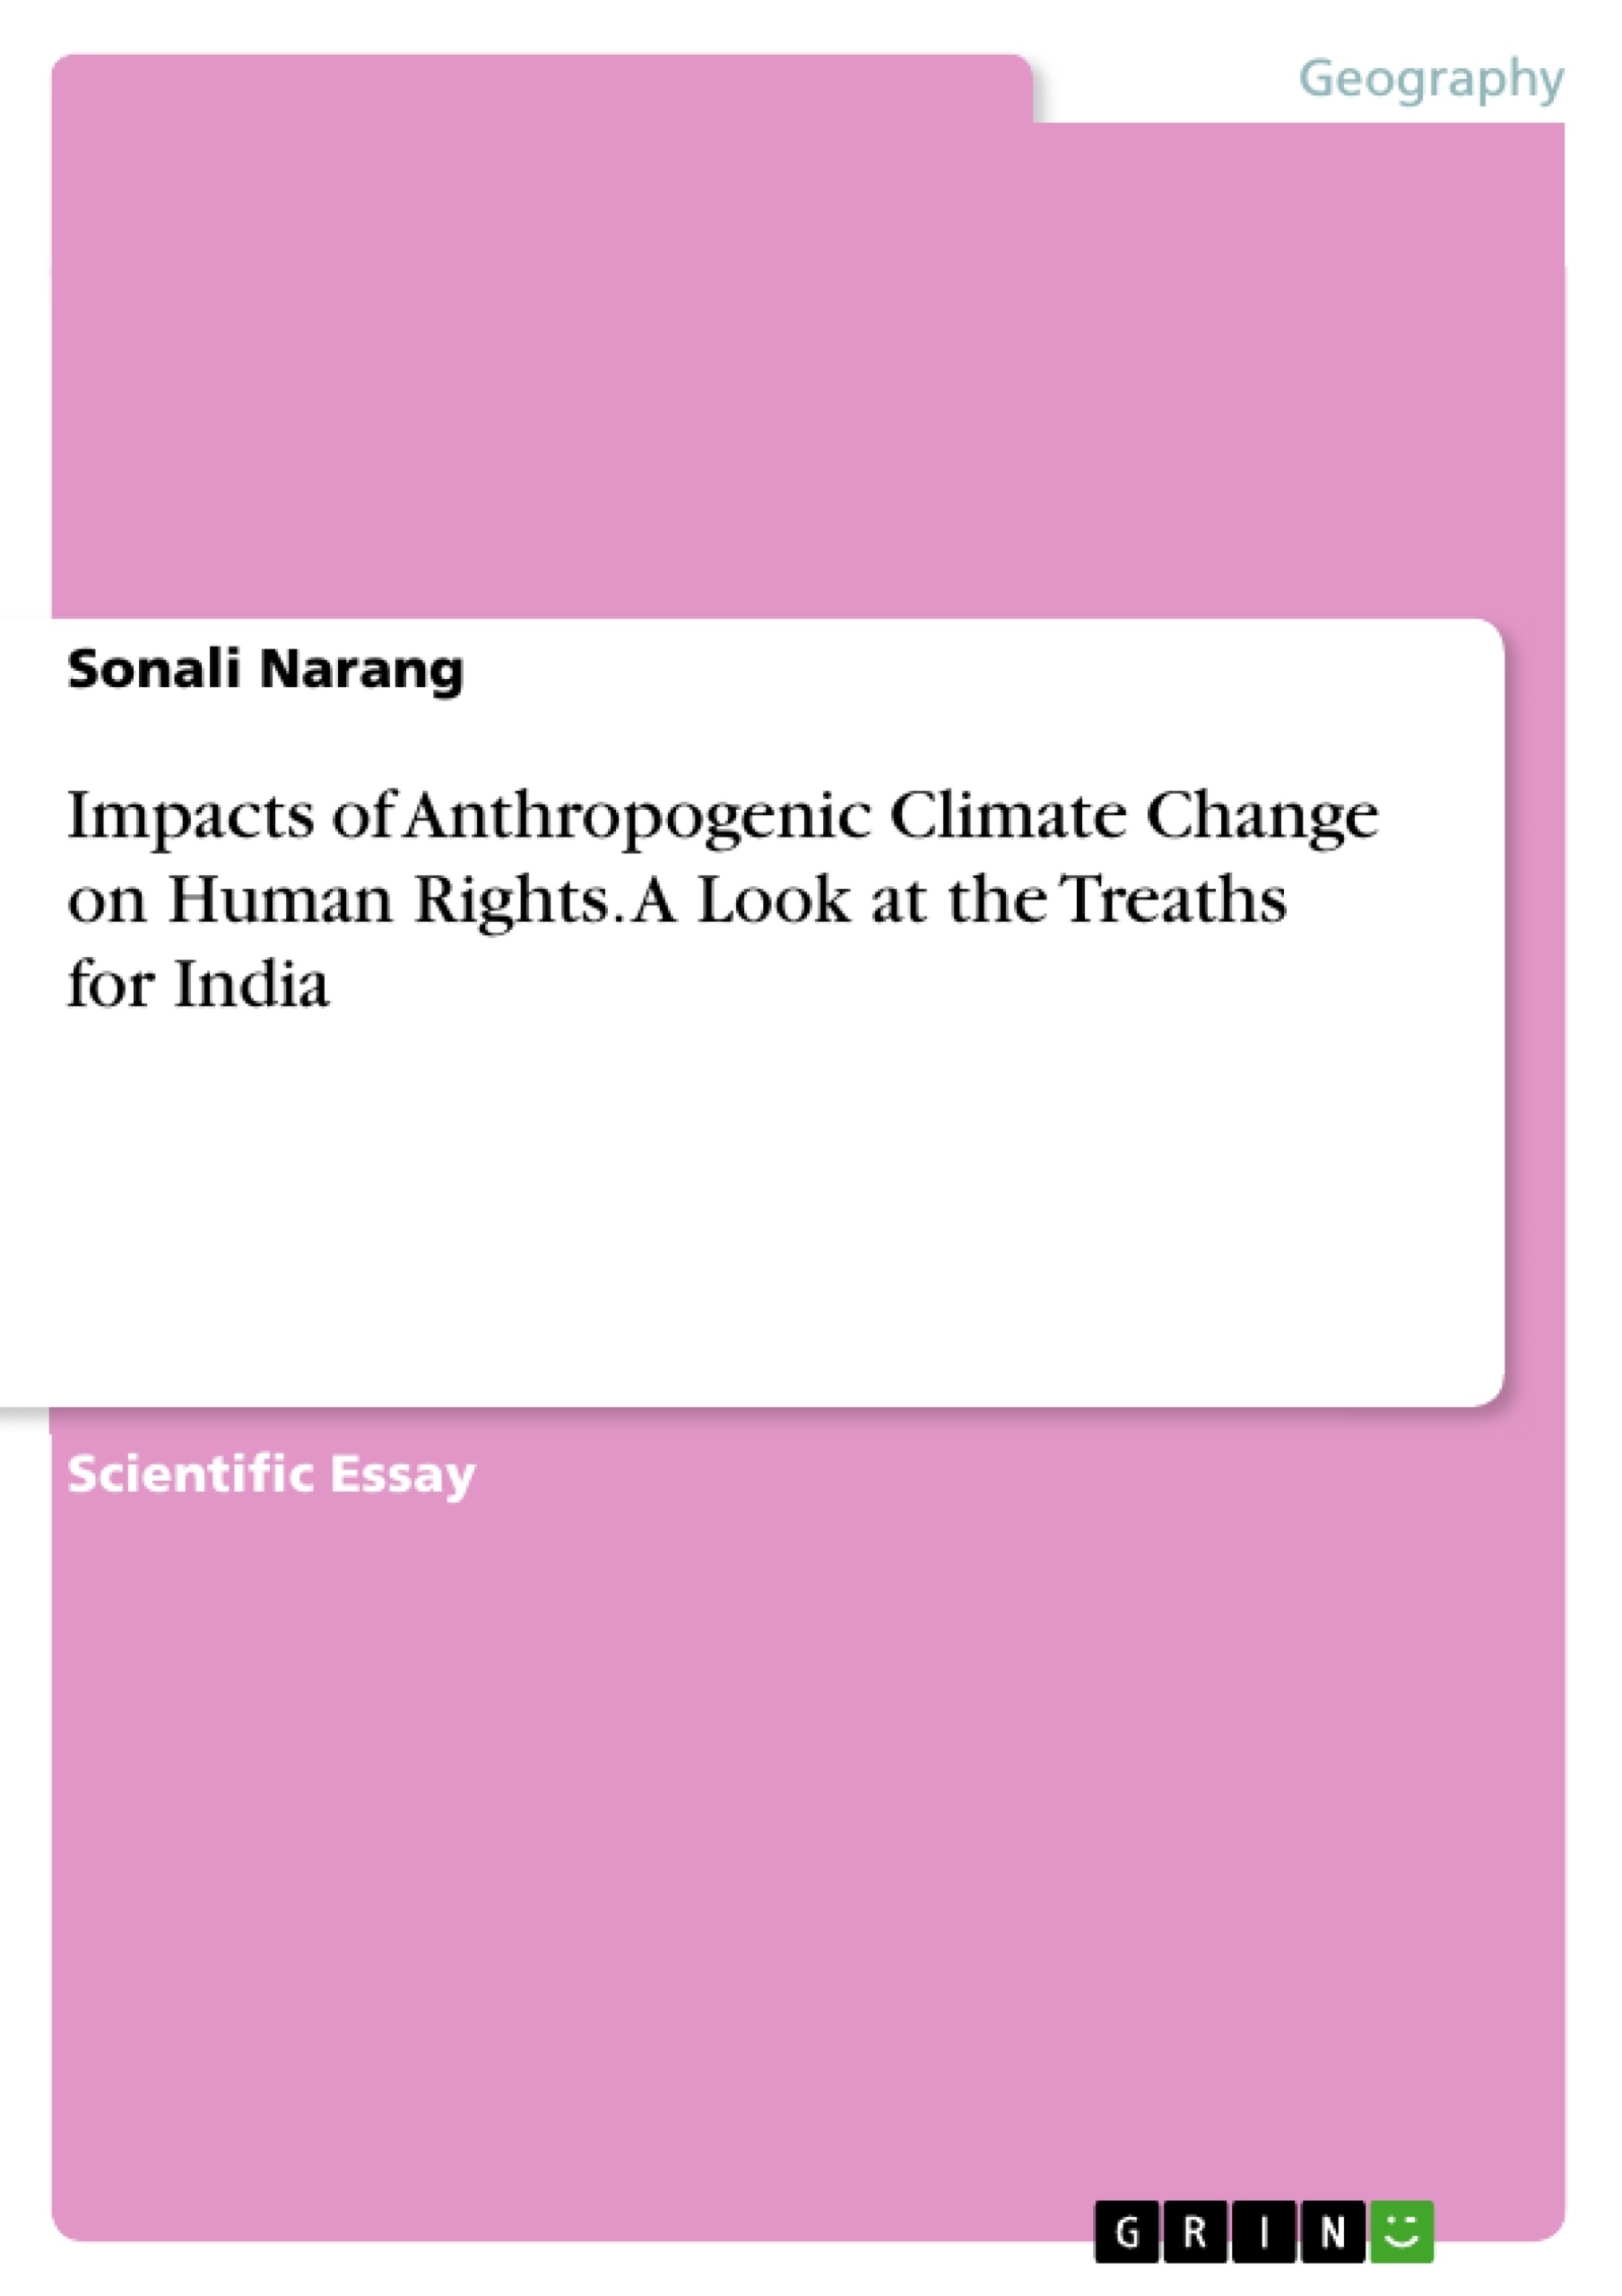 Título: Impacts of Anthropogenic Climate Change on Human Rights. A Look at the Treaths for India